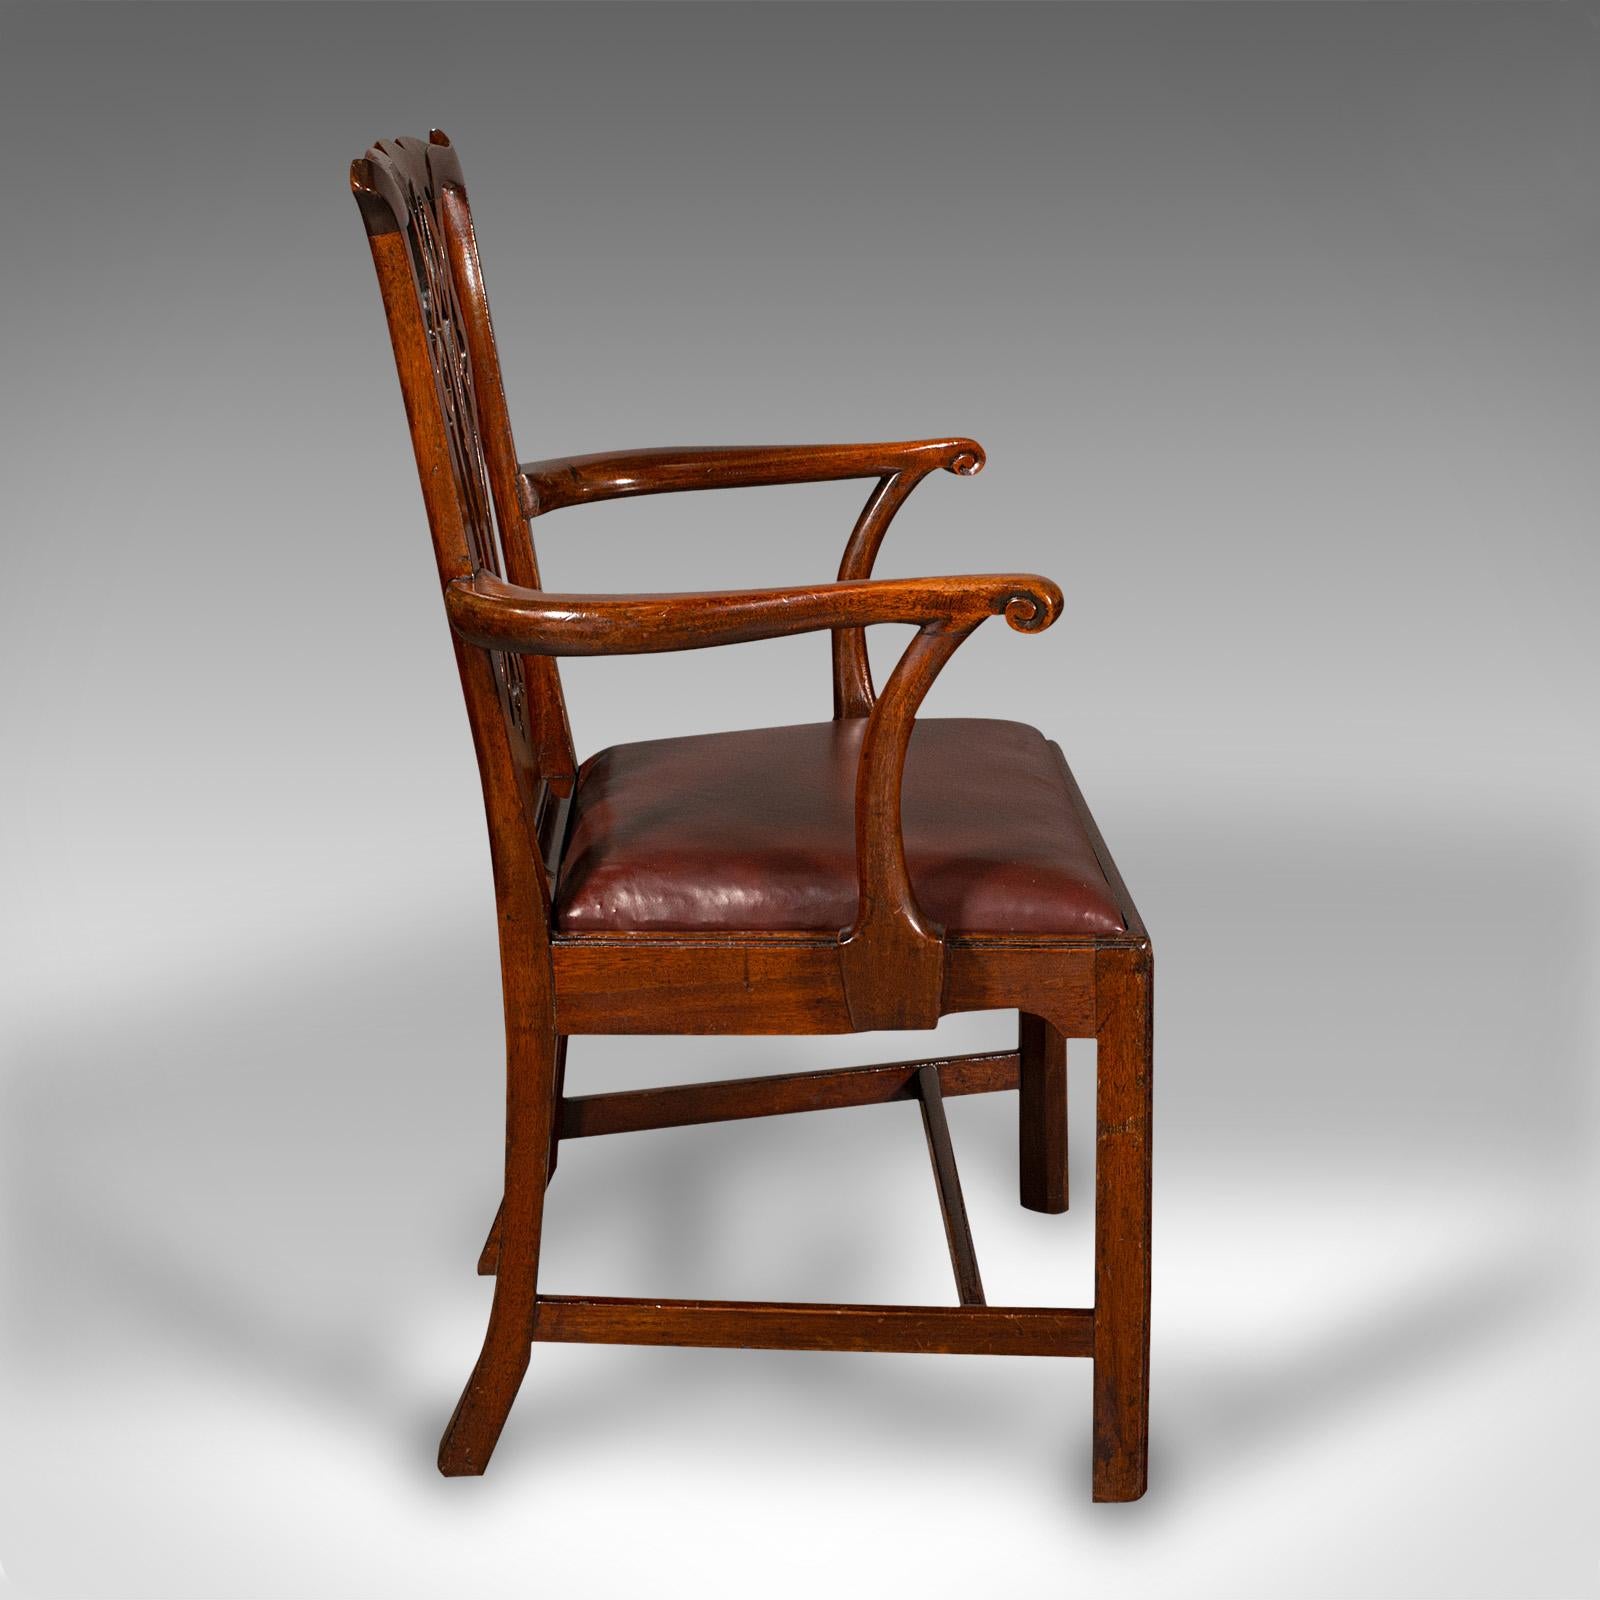 British Pair Of Antique Carver Chairs, English, Elbow Seat, Chippendale Taste, Georgian For Sale